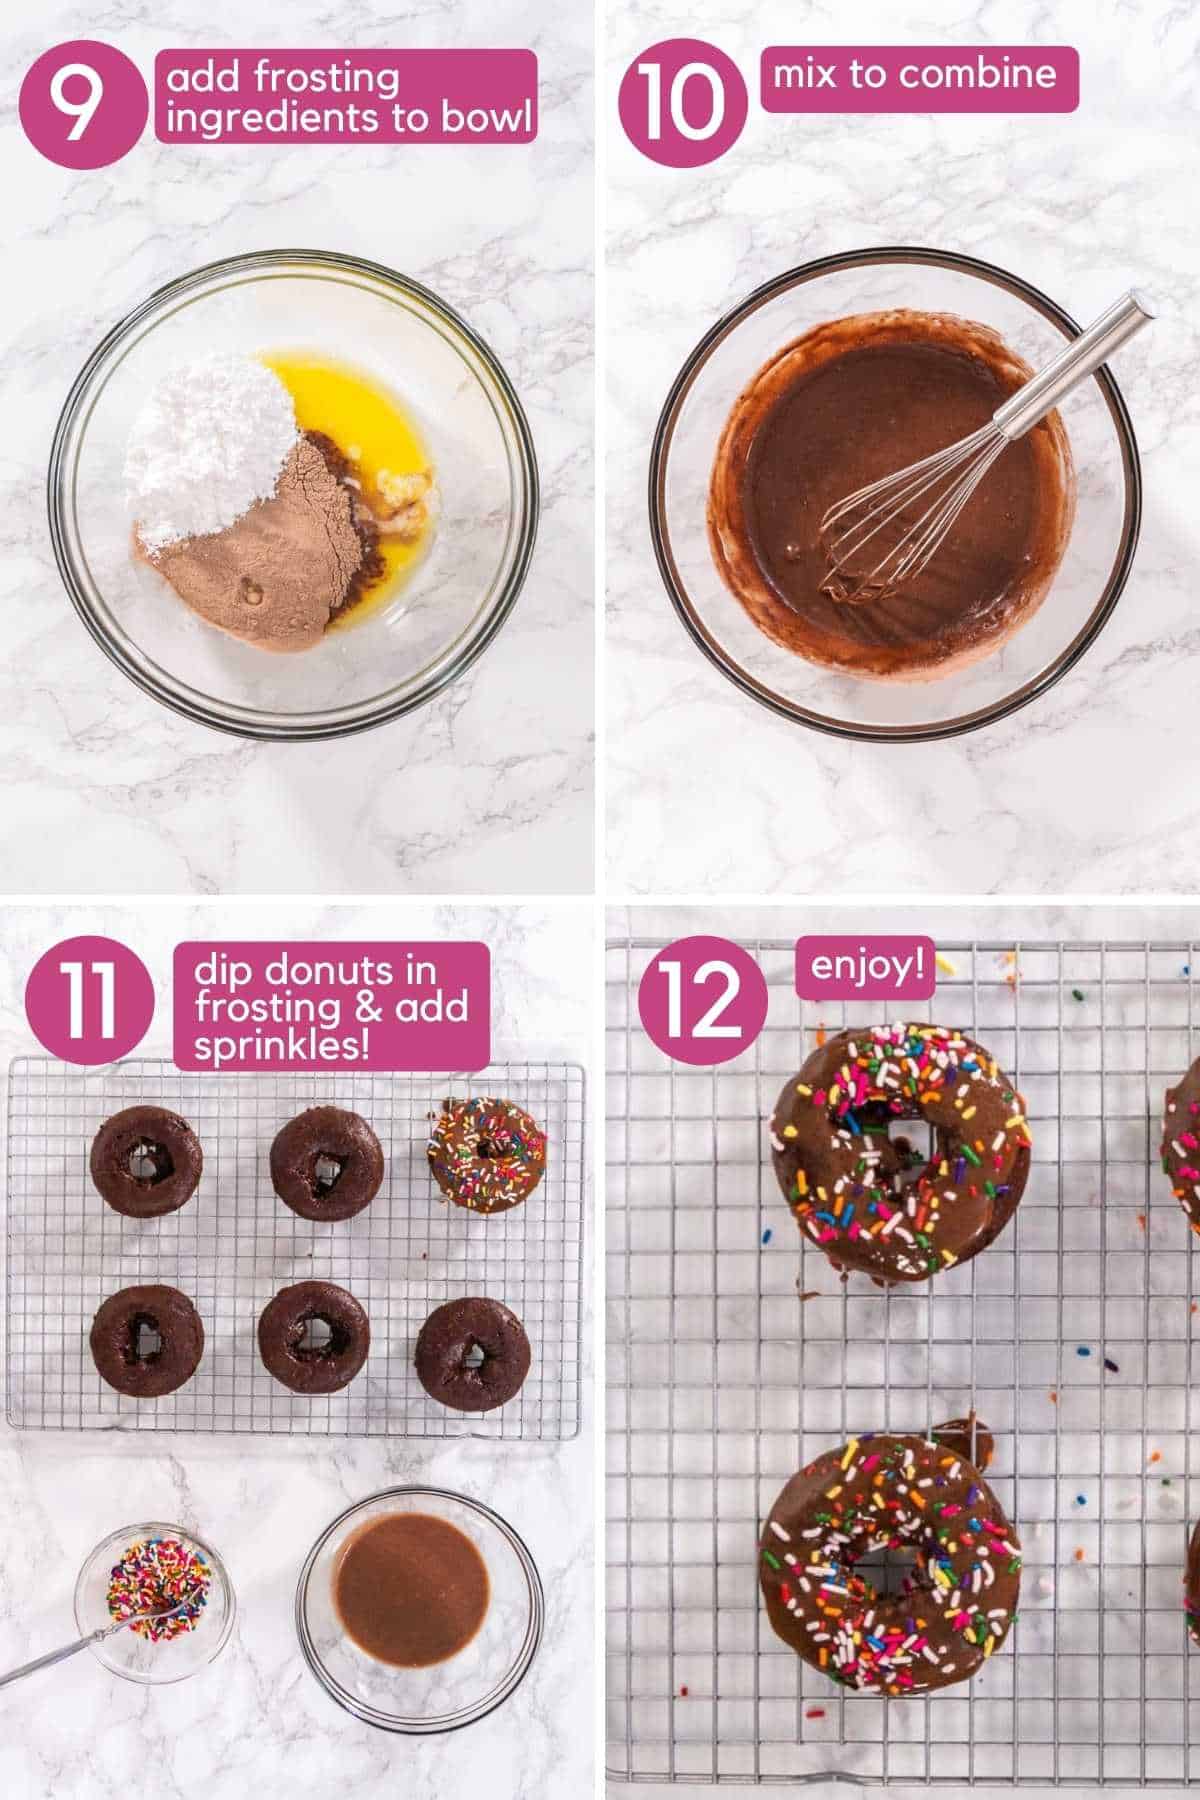 Make frosting and dip donuts for chocolate protein donuts.